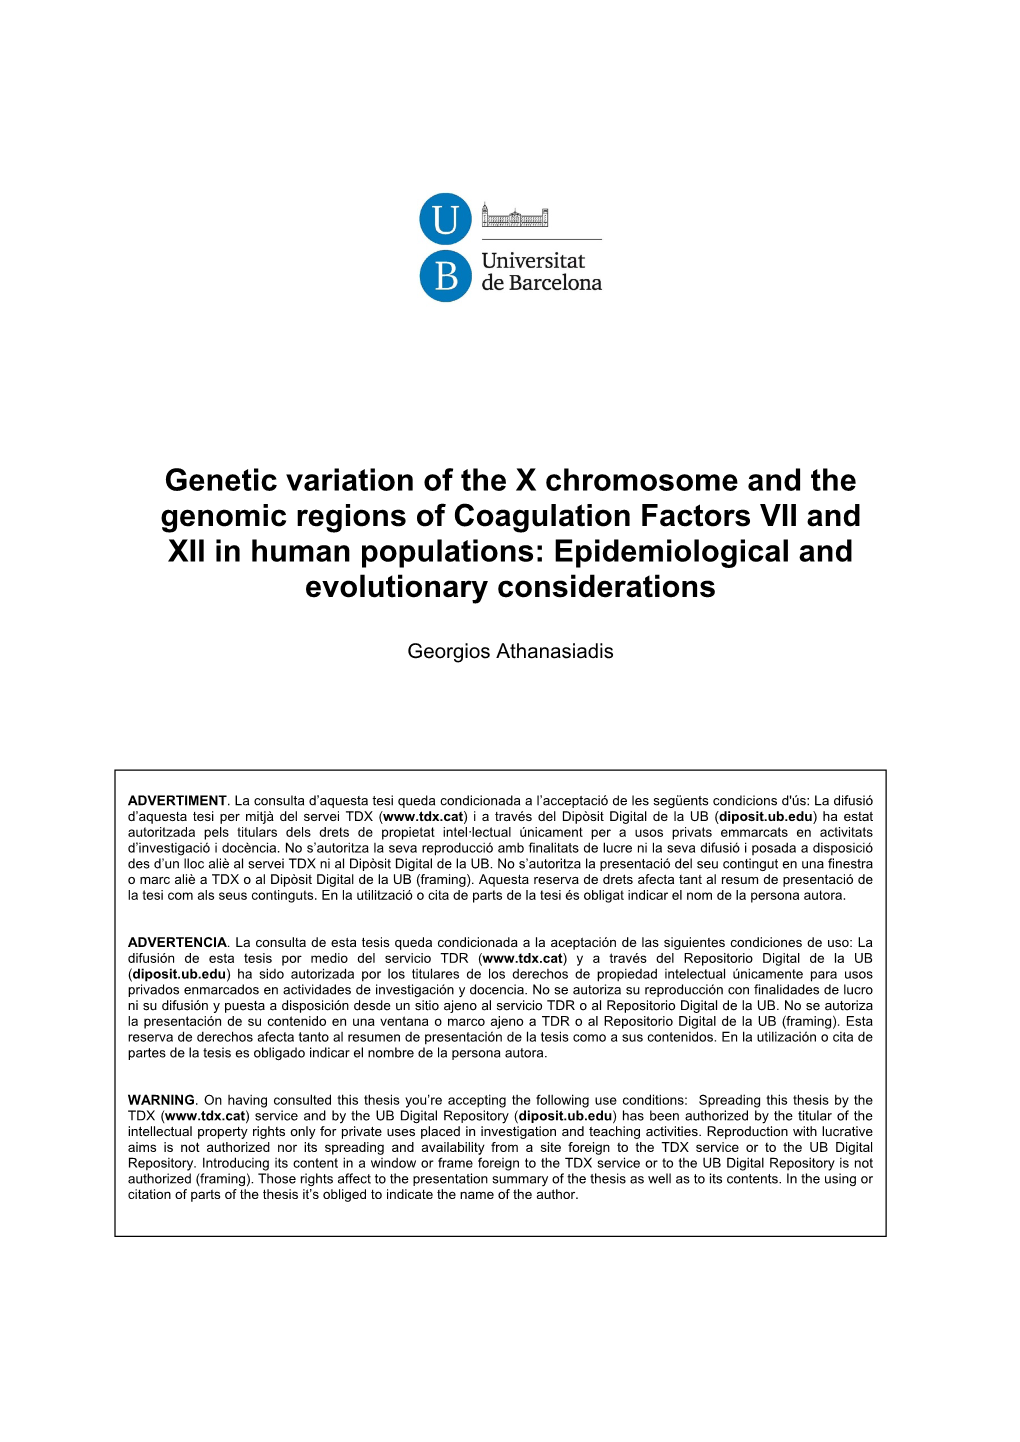 Genetic Variation of the X Chromosome and the Genomic